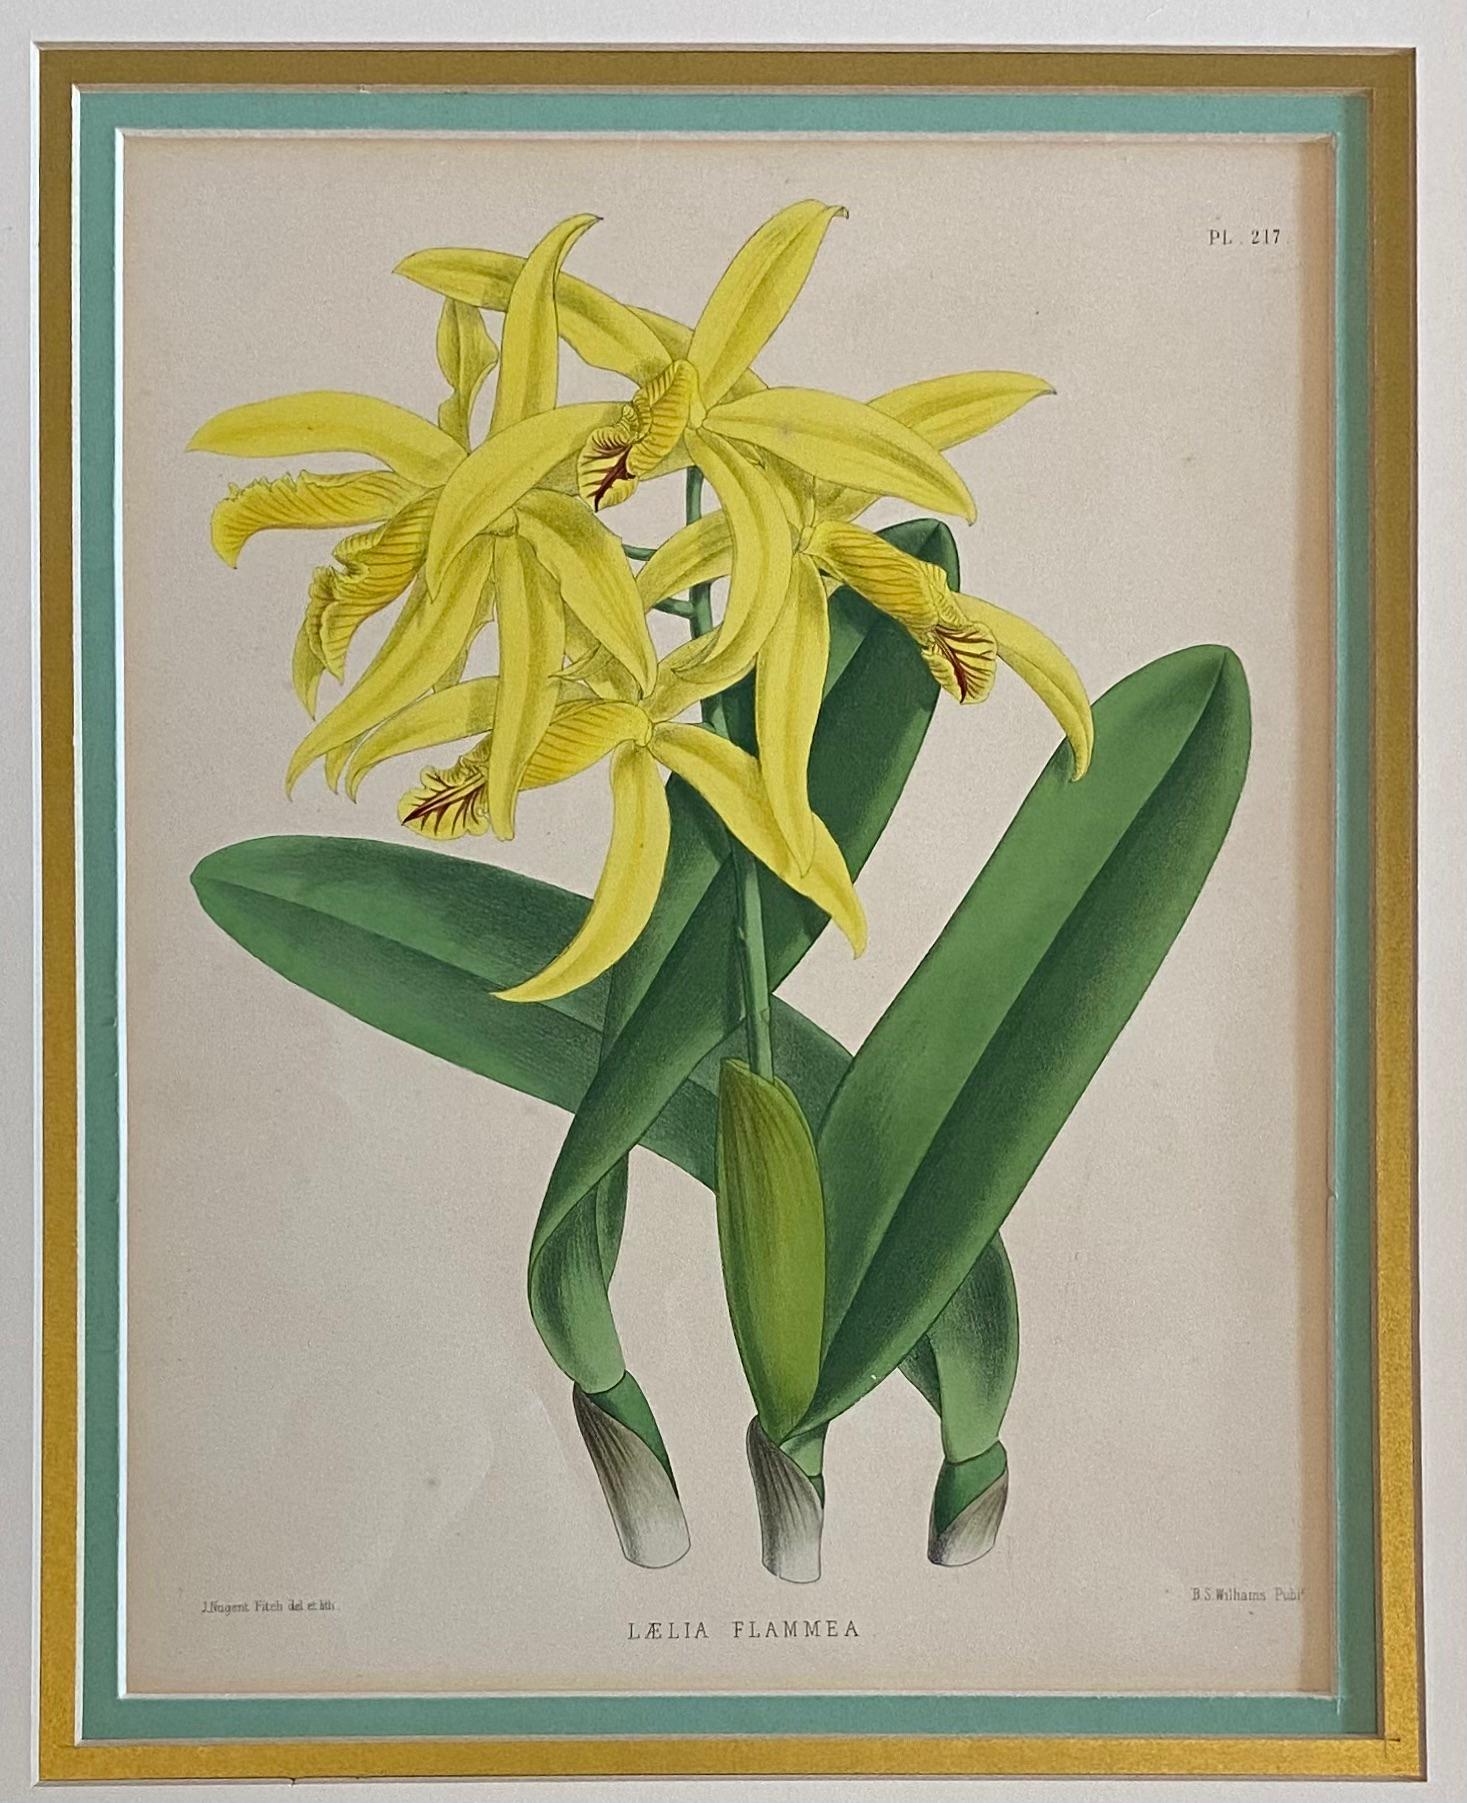 A beautiful antique engraving print of a botanical plant, Lalia Flammea. Presumably from the English book 